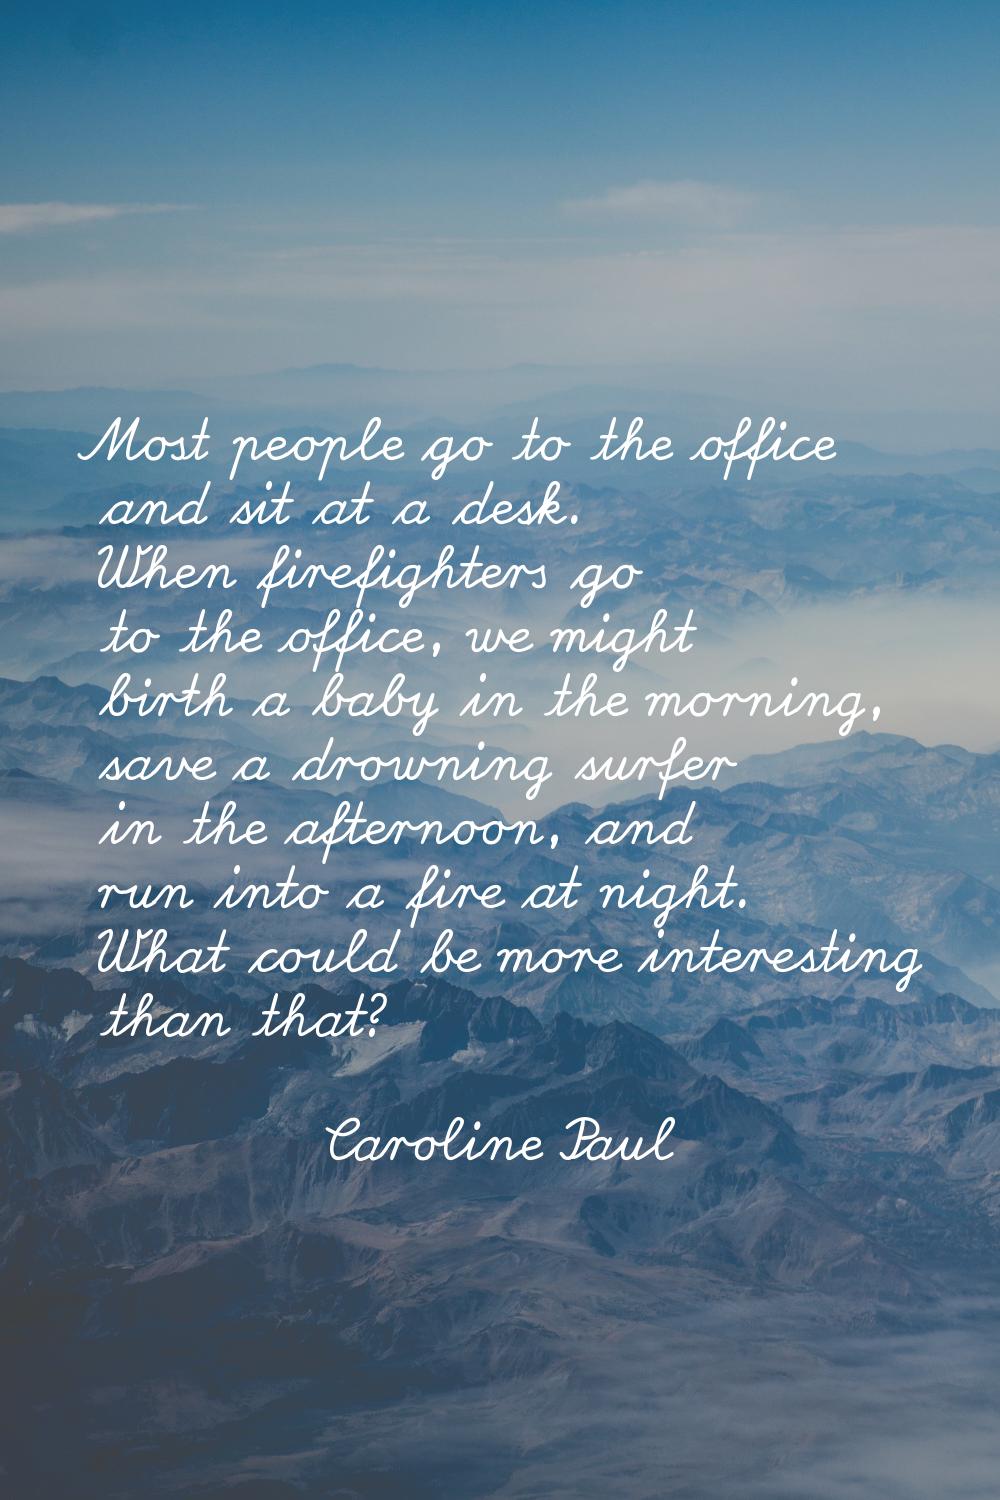 Most people go to the office and sit at a desk. When firefighters go to the office, we might birth 